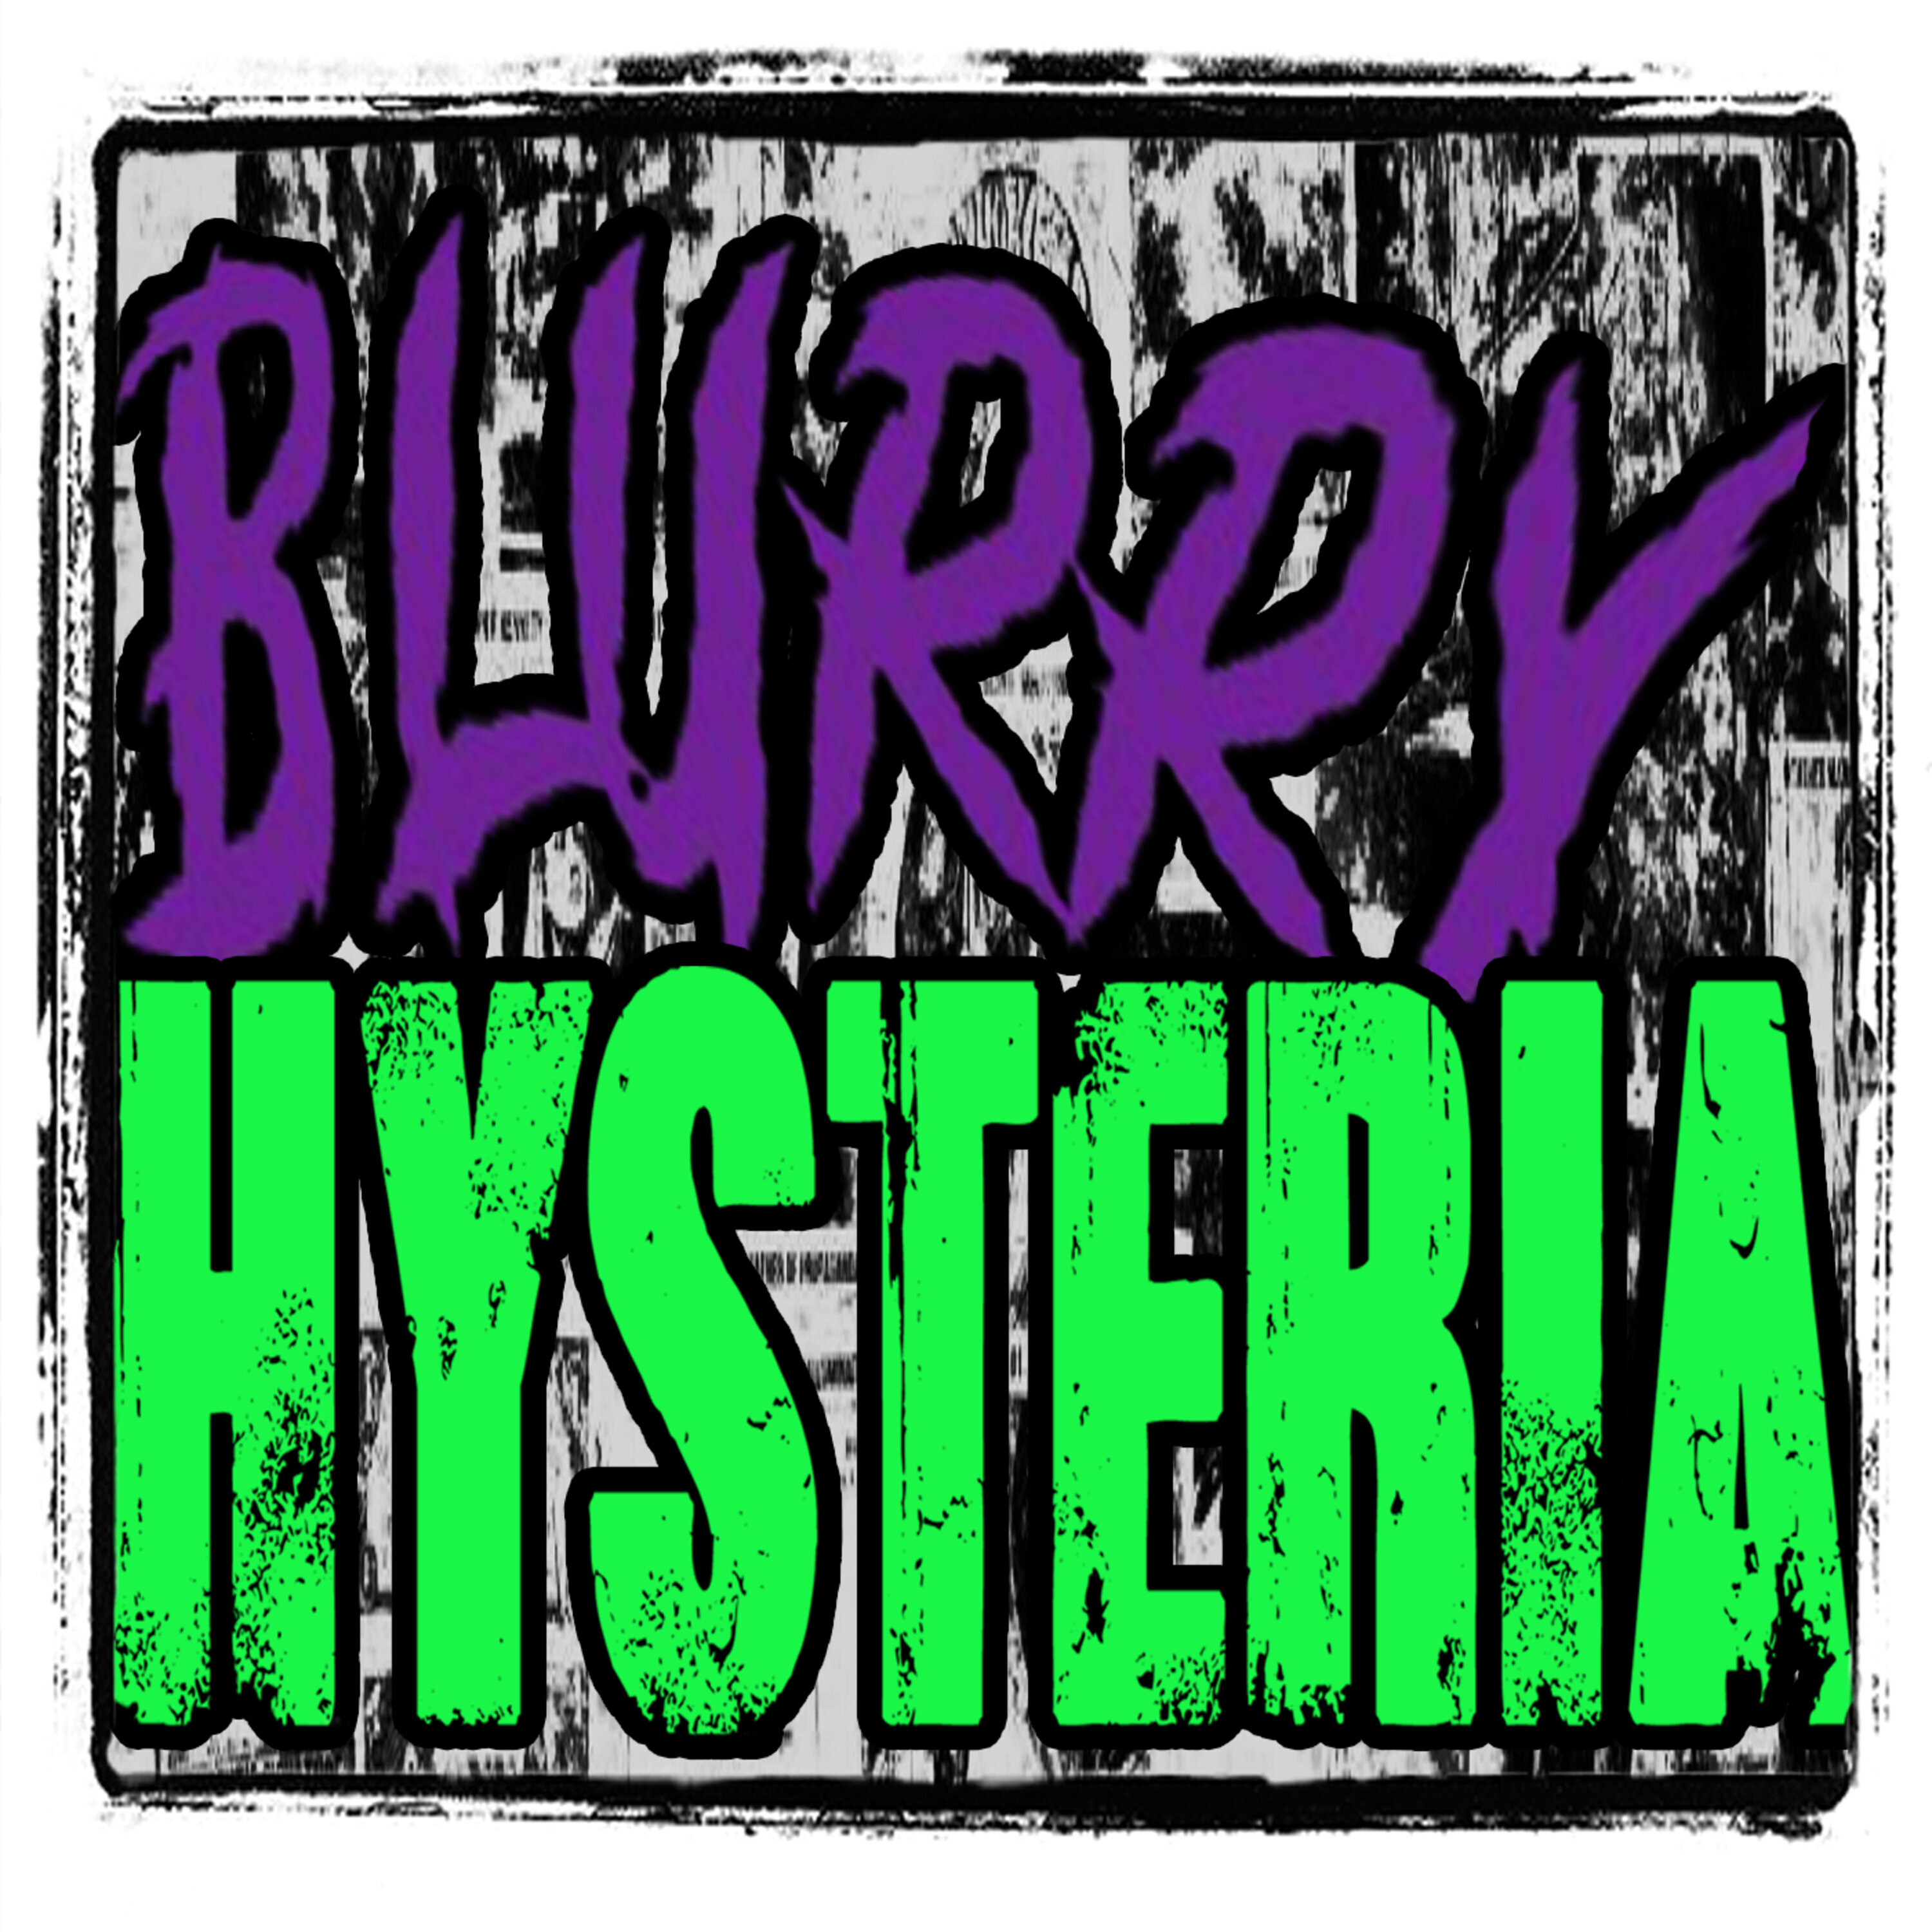 Blurry Hysteria: Thirsty Space Mermaids! Image